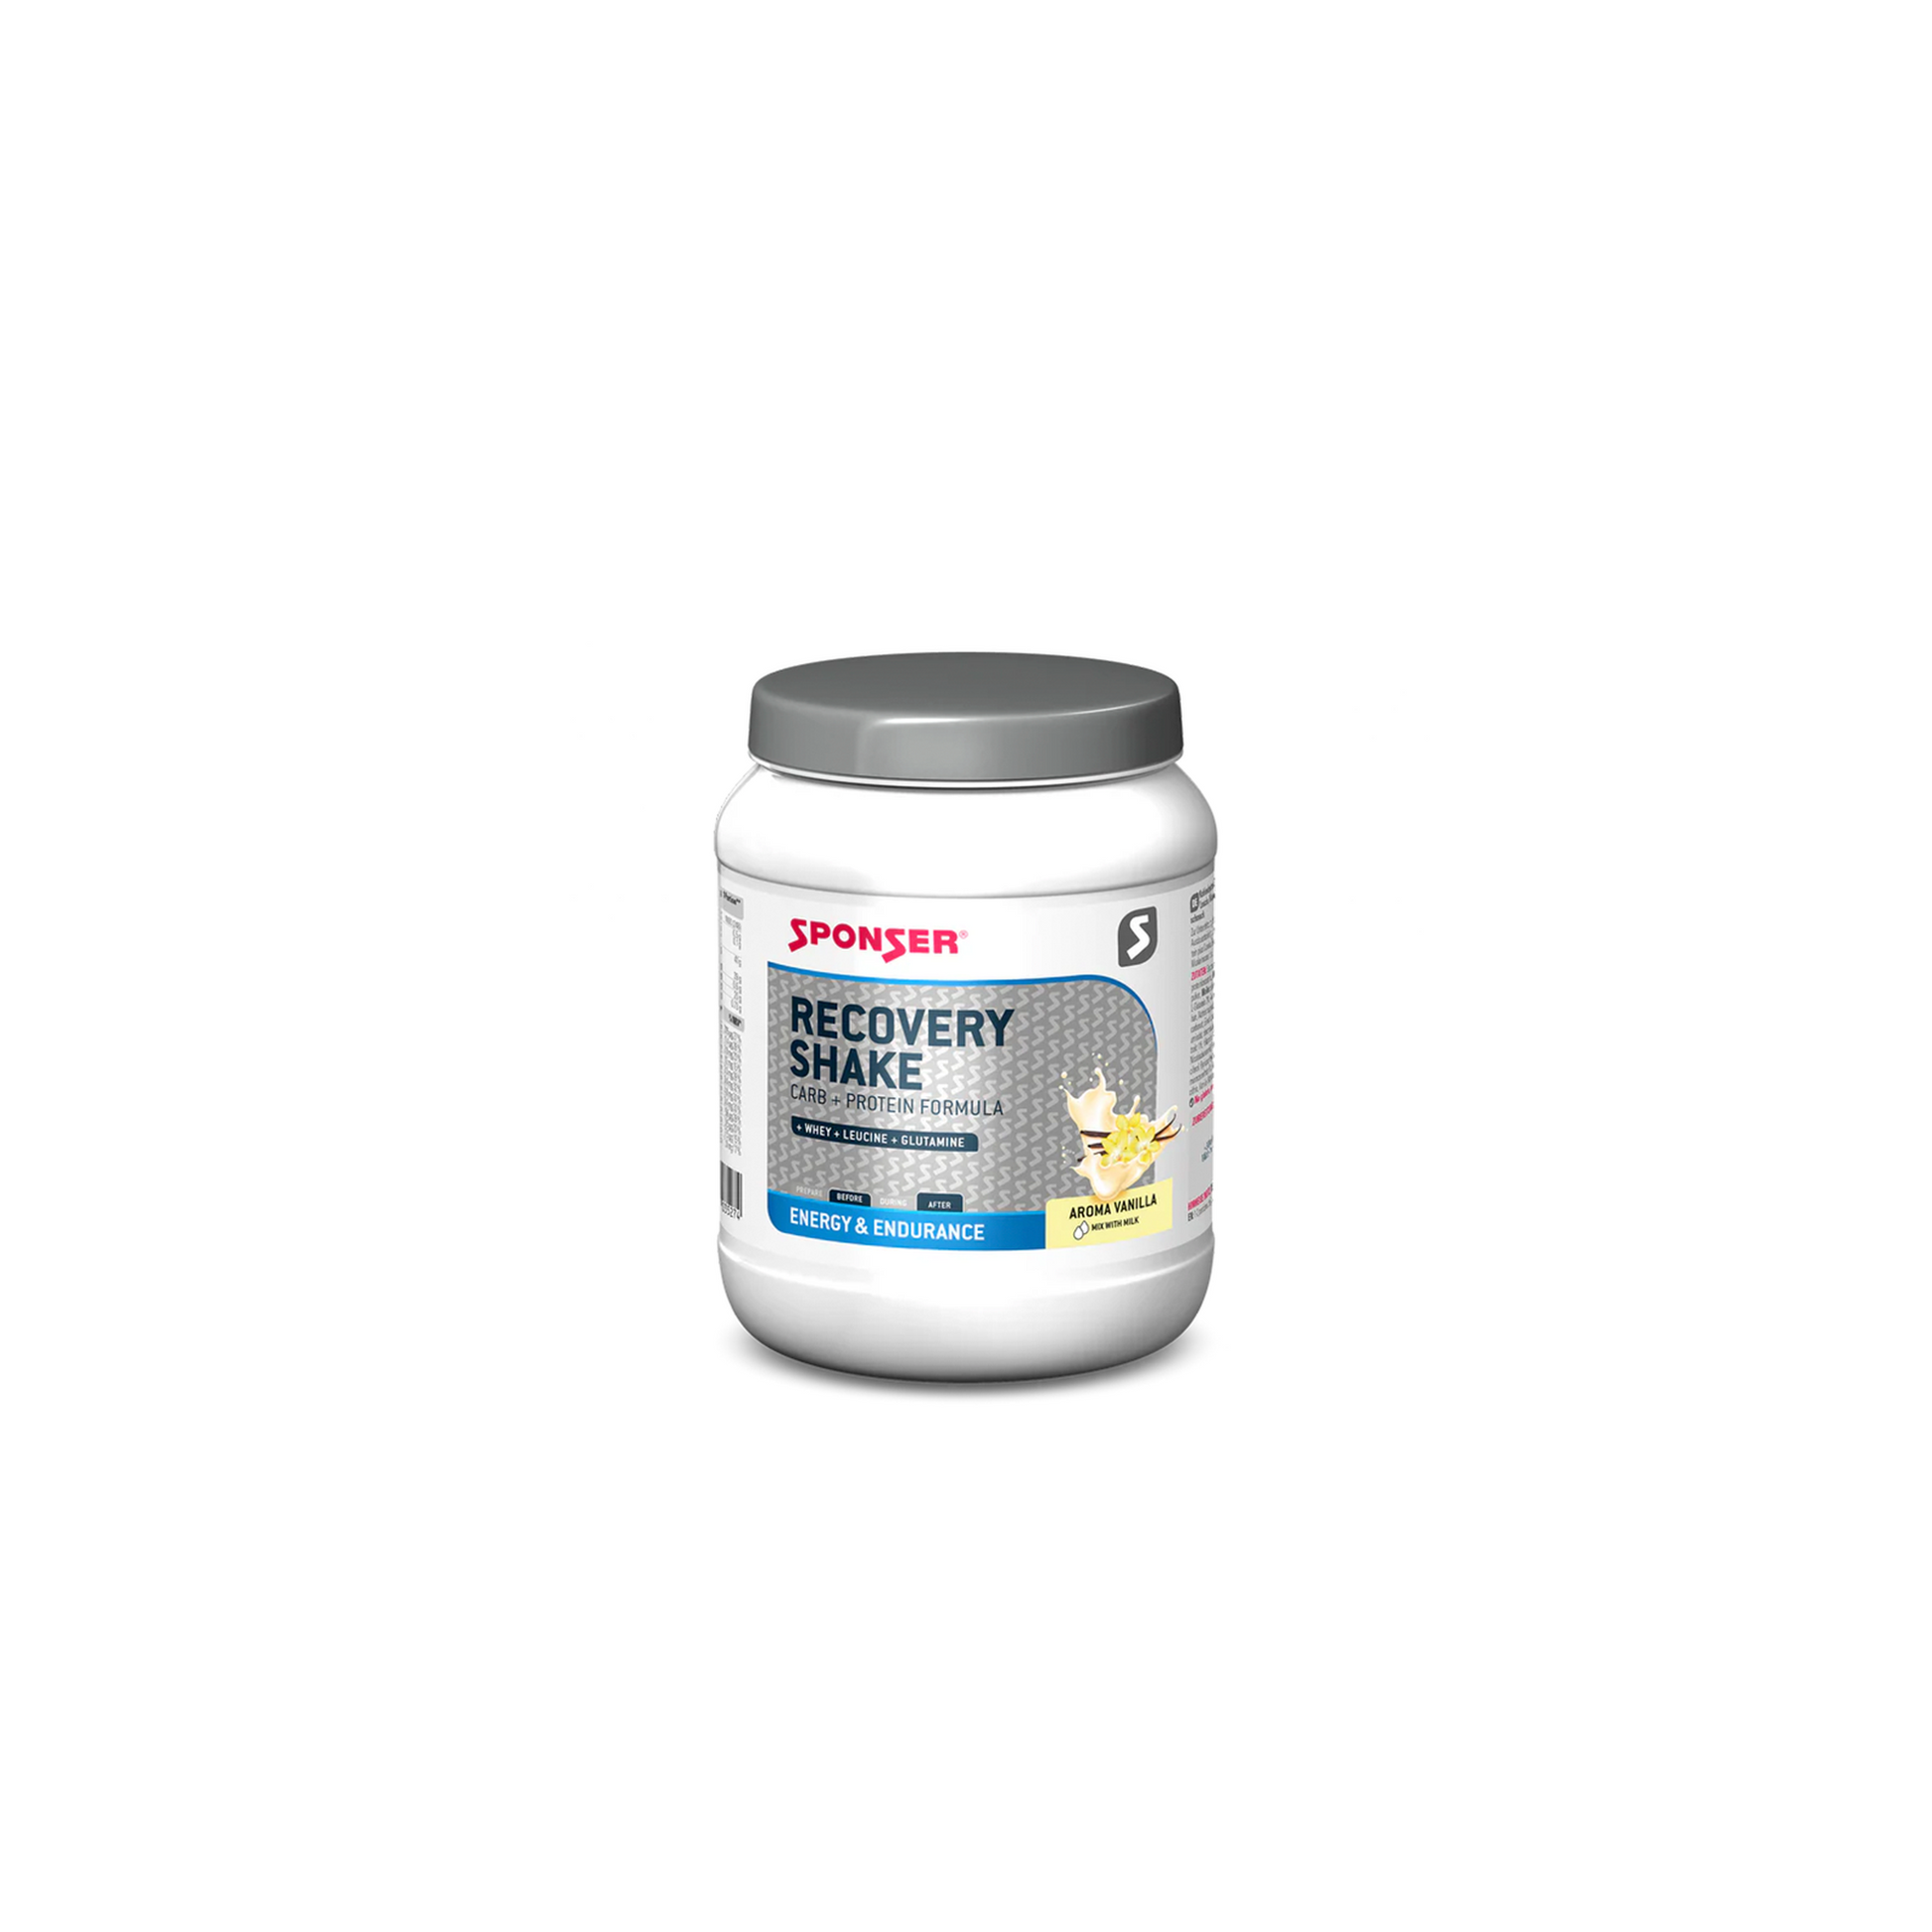 Sponser Recovery Shake - 900g | Complete Cyclist - RECOVERY SHAKE by Sponser® is an "all-in-one" regeneration shake after hard training sessions in strength and endurance sports. 